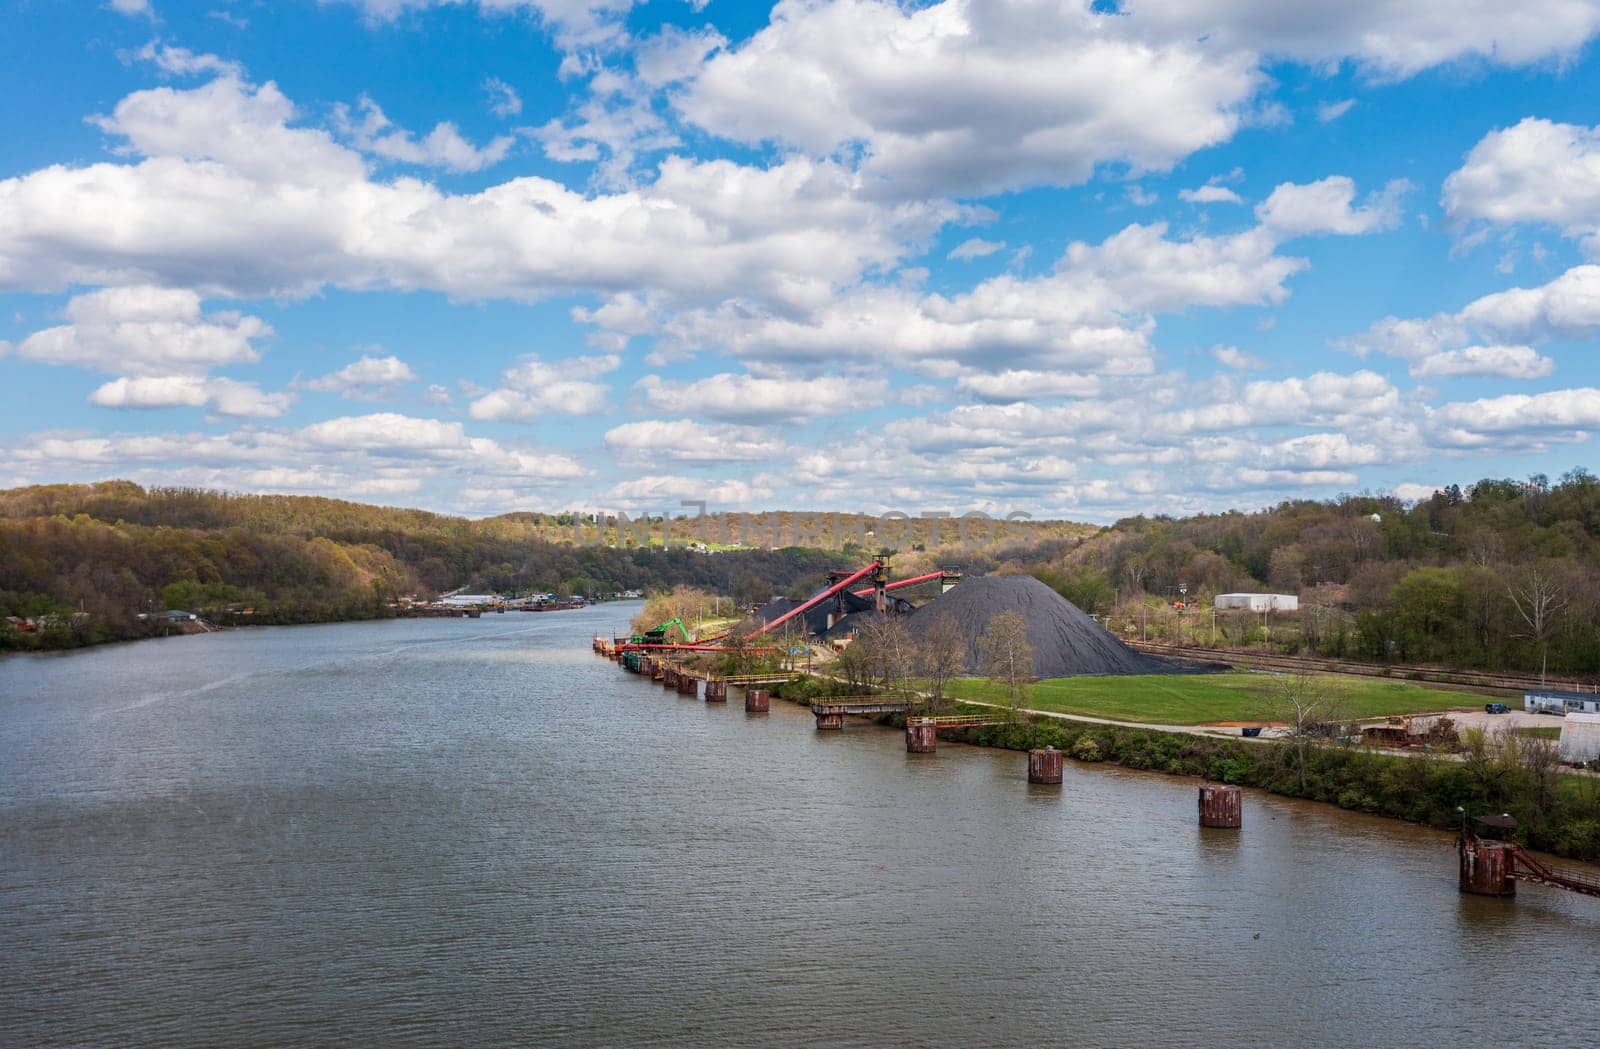 Coal piled by the Monongahala river by Vestaburg in Pennsylvania by steheap